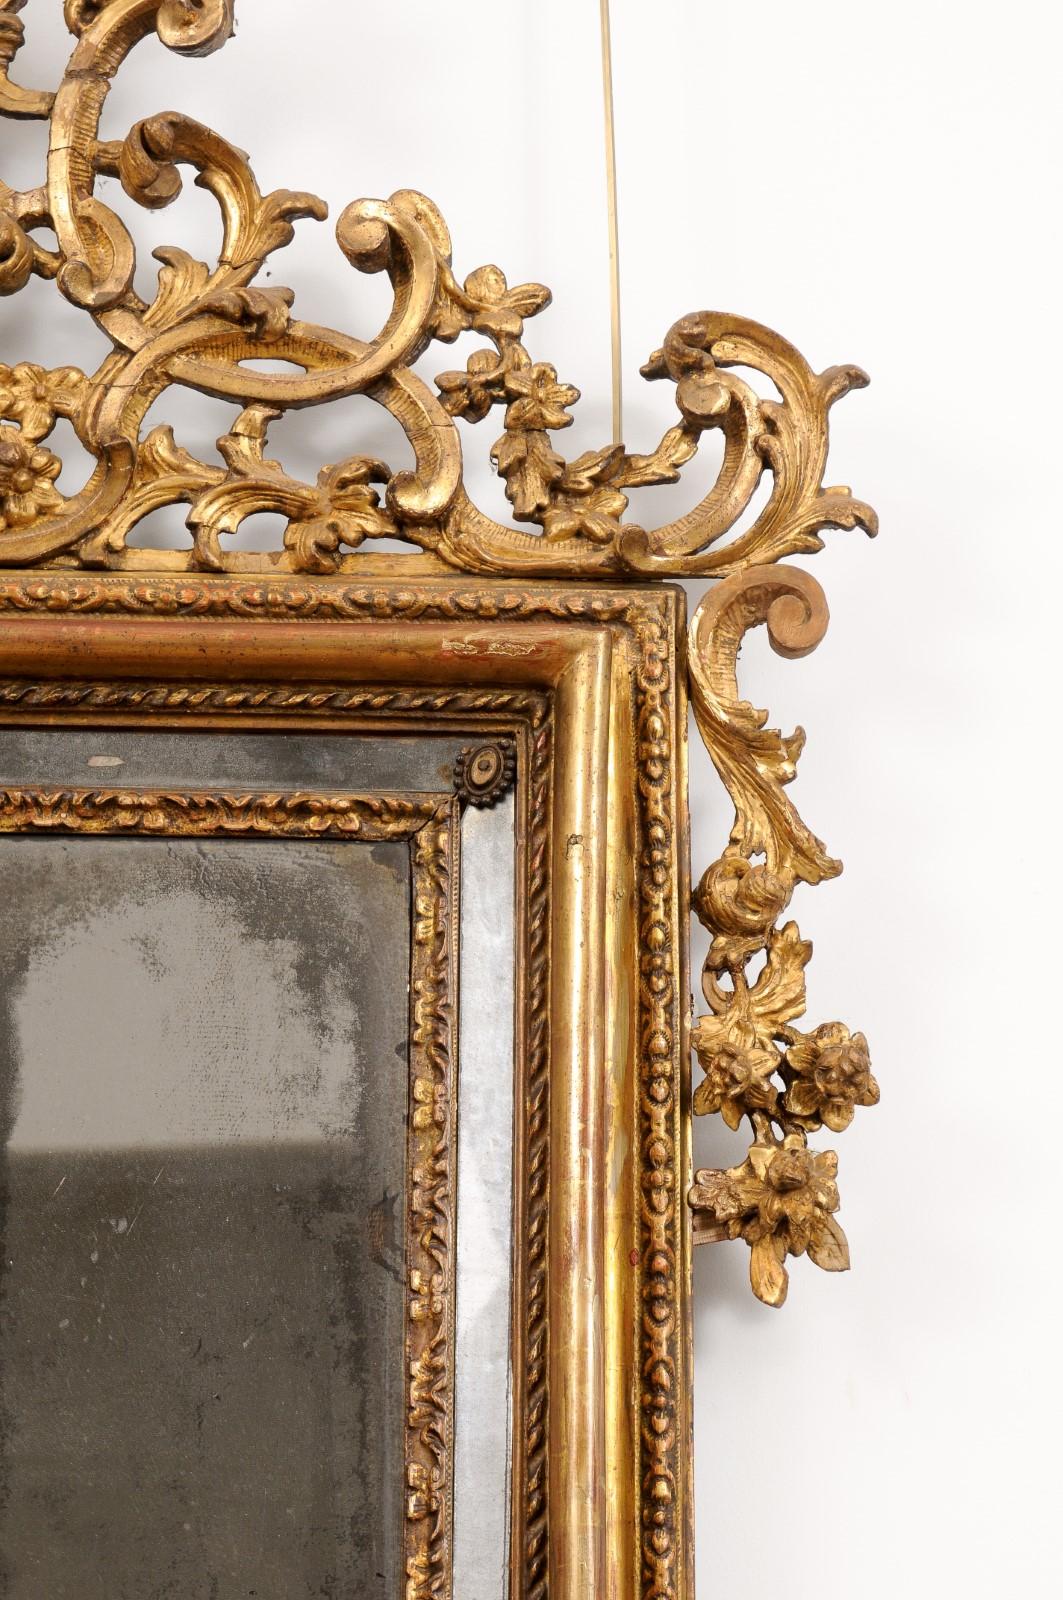 Large 18th Century Italian Rococo Giltwood Mirror with Pagoda Top For Sale 5